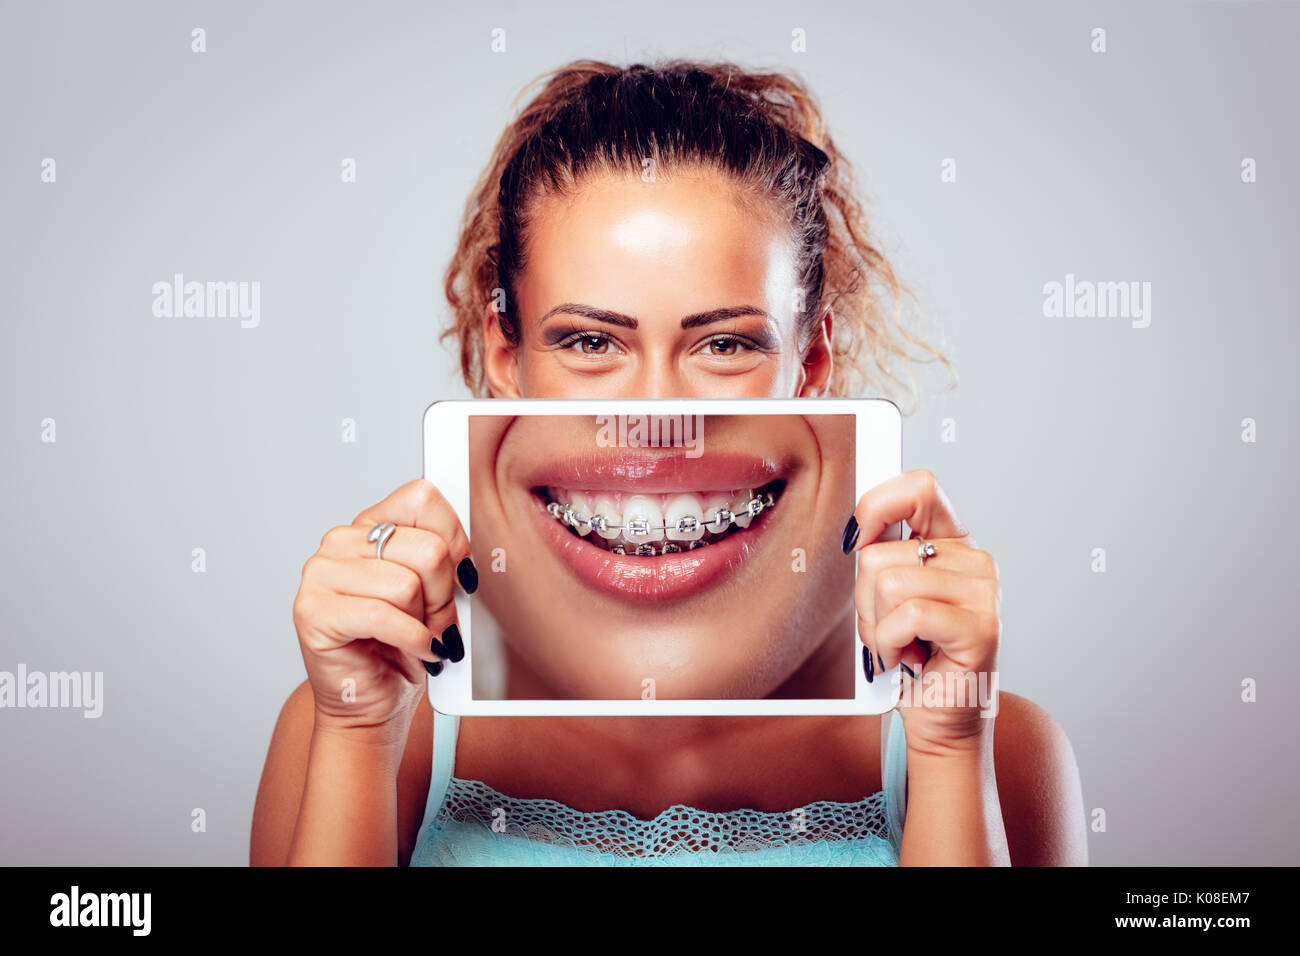 Smiling girl with braces on teeth behind digital tablet. Looking at camera. Stock Photo